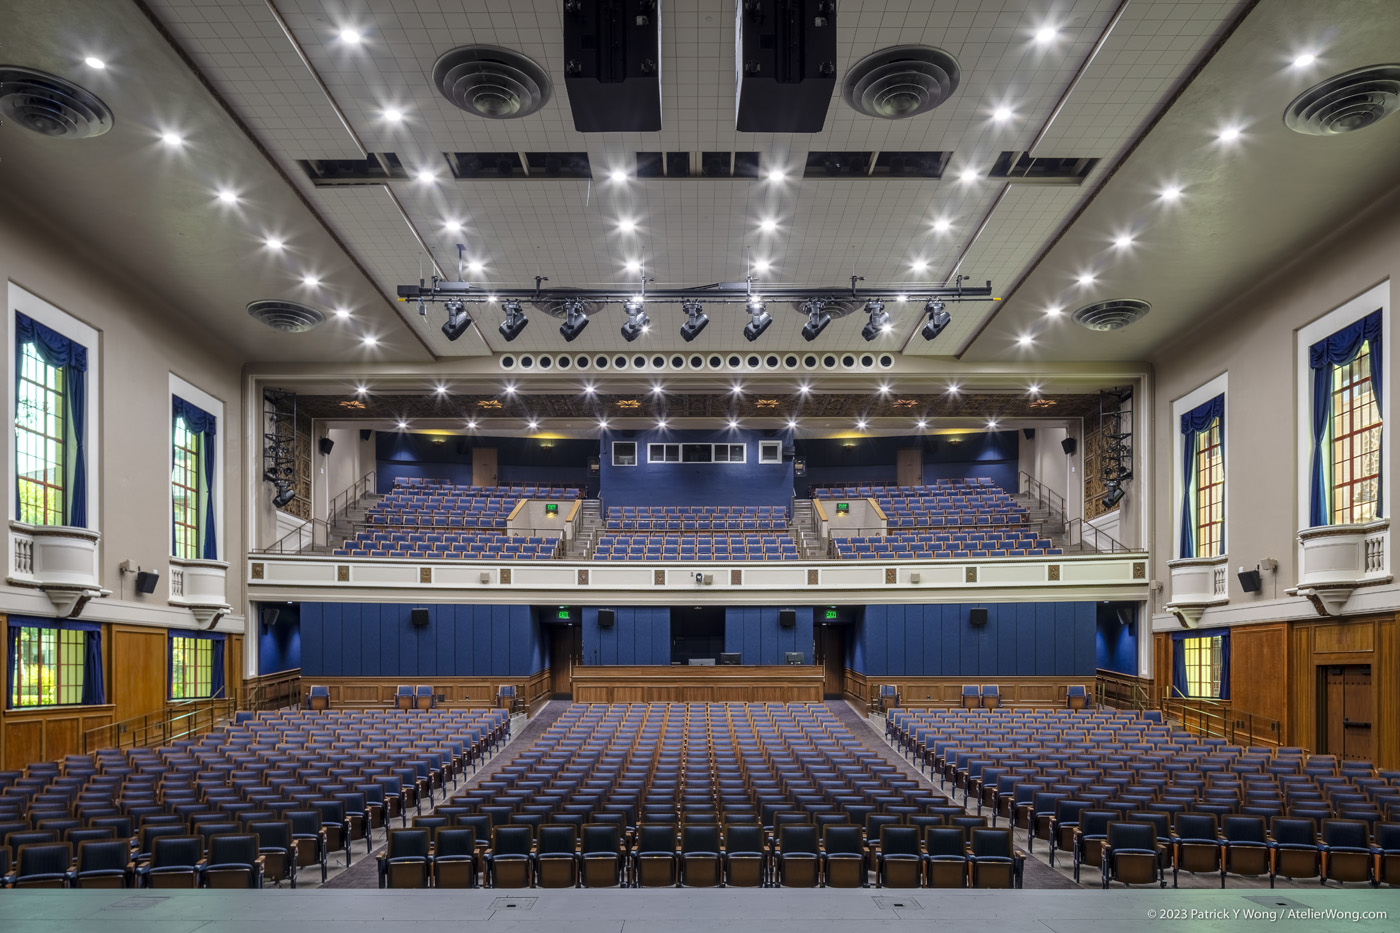 Views of an auditorium from the stage, with house lights on and window shades open.